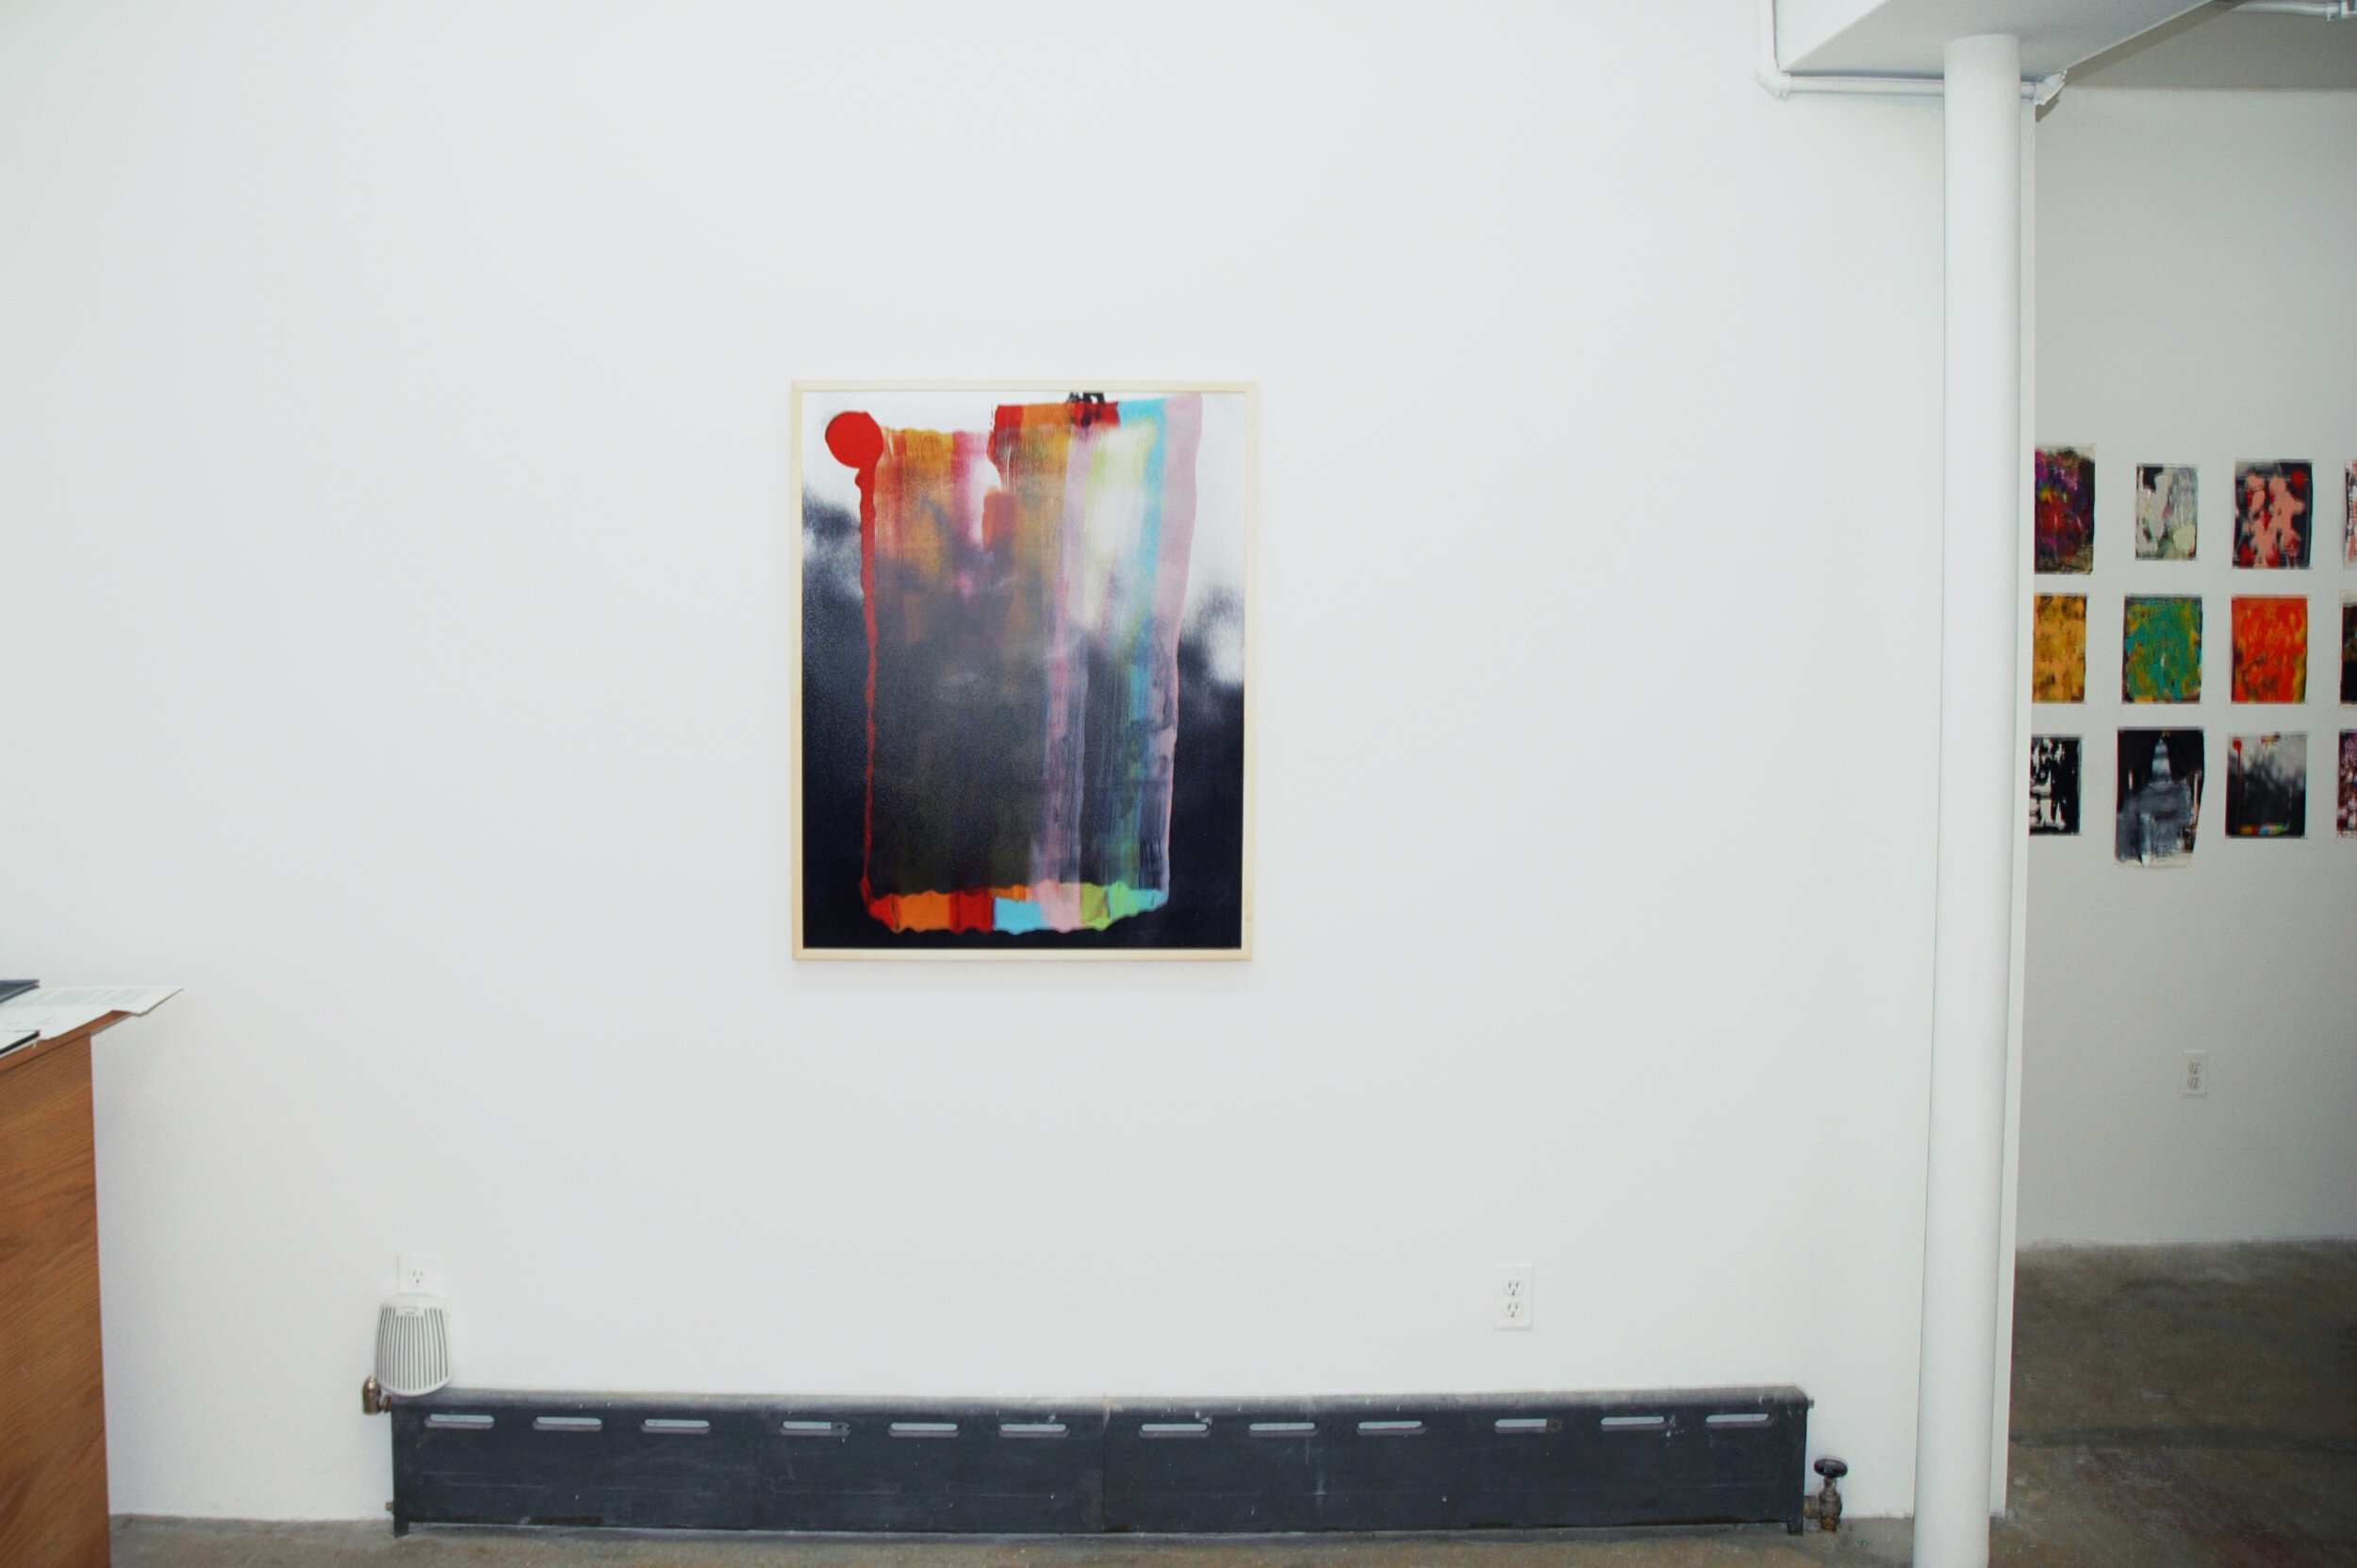 Installation image from the 2014 Rusty Shackleford exhibition, Repeater, at Cindy Rucker Gallery